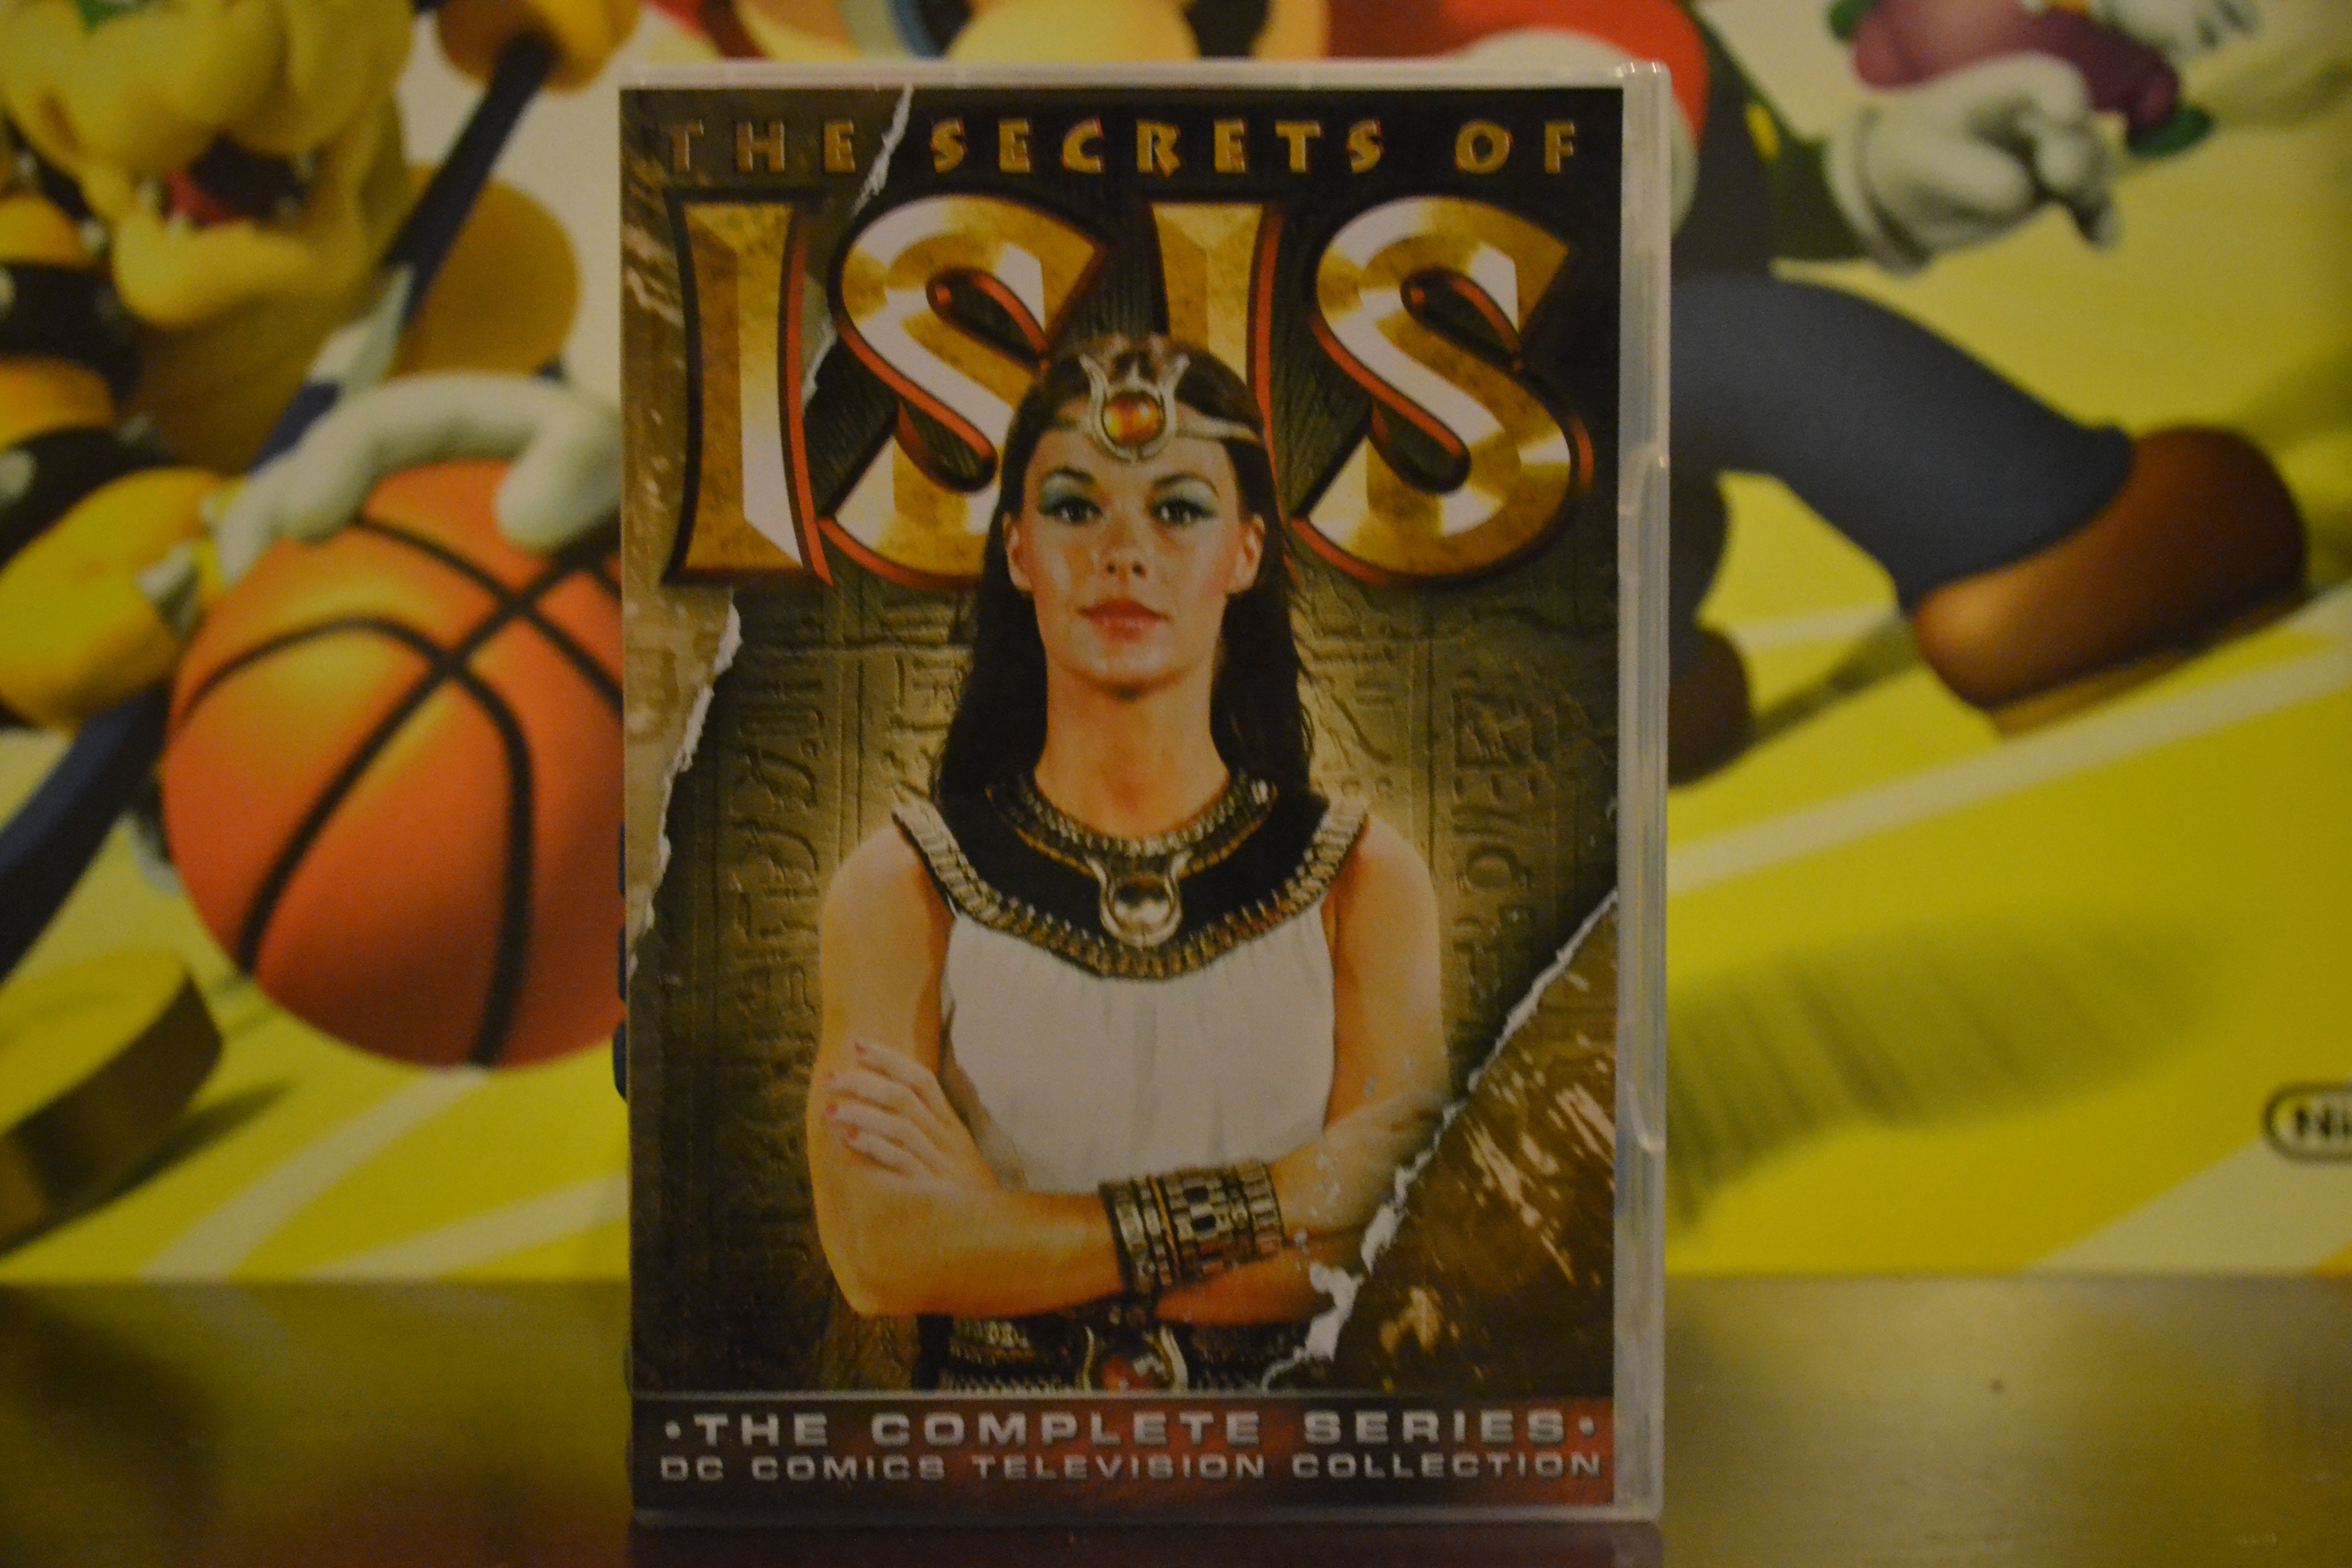 The Secrets Of ISIS The Complete Series DvD Set